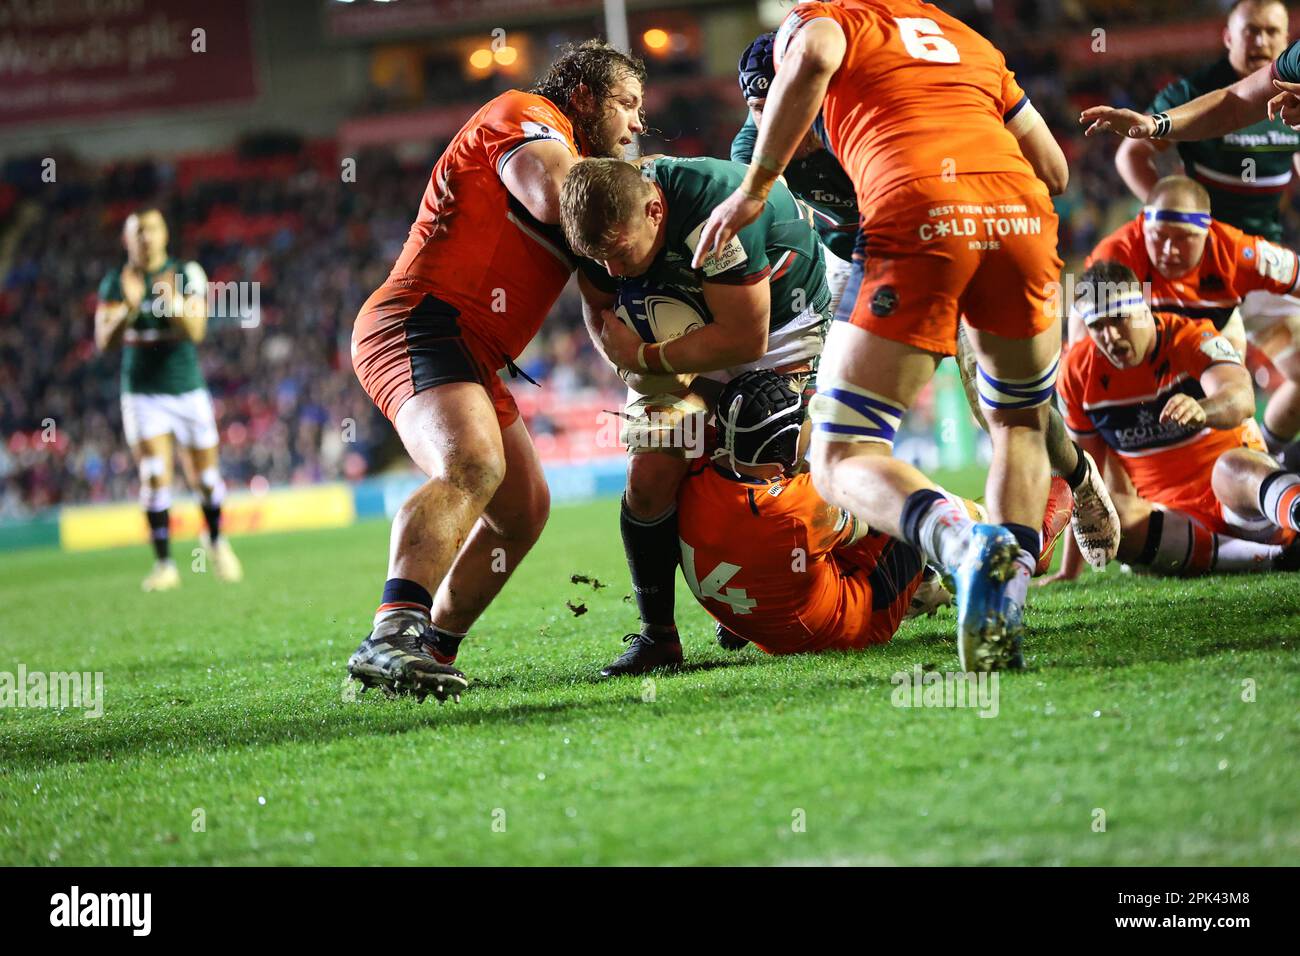 31.03.2022   Leicester, England. Rugby Union.                   Tigers Olly Cracknel makes a break during the Heineken Champions Cup quarter final match played between Leicester Tigers and Edinburgh Rugby at the Mattioli Woods Welford Road Stadium, Leicester.  © Phil Hutchinson Stock Photo